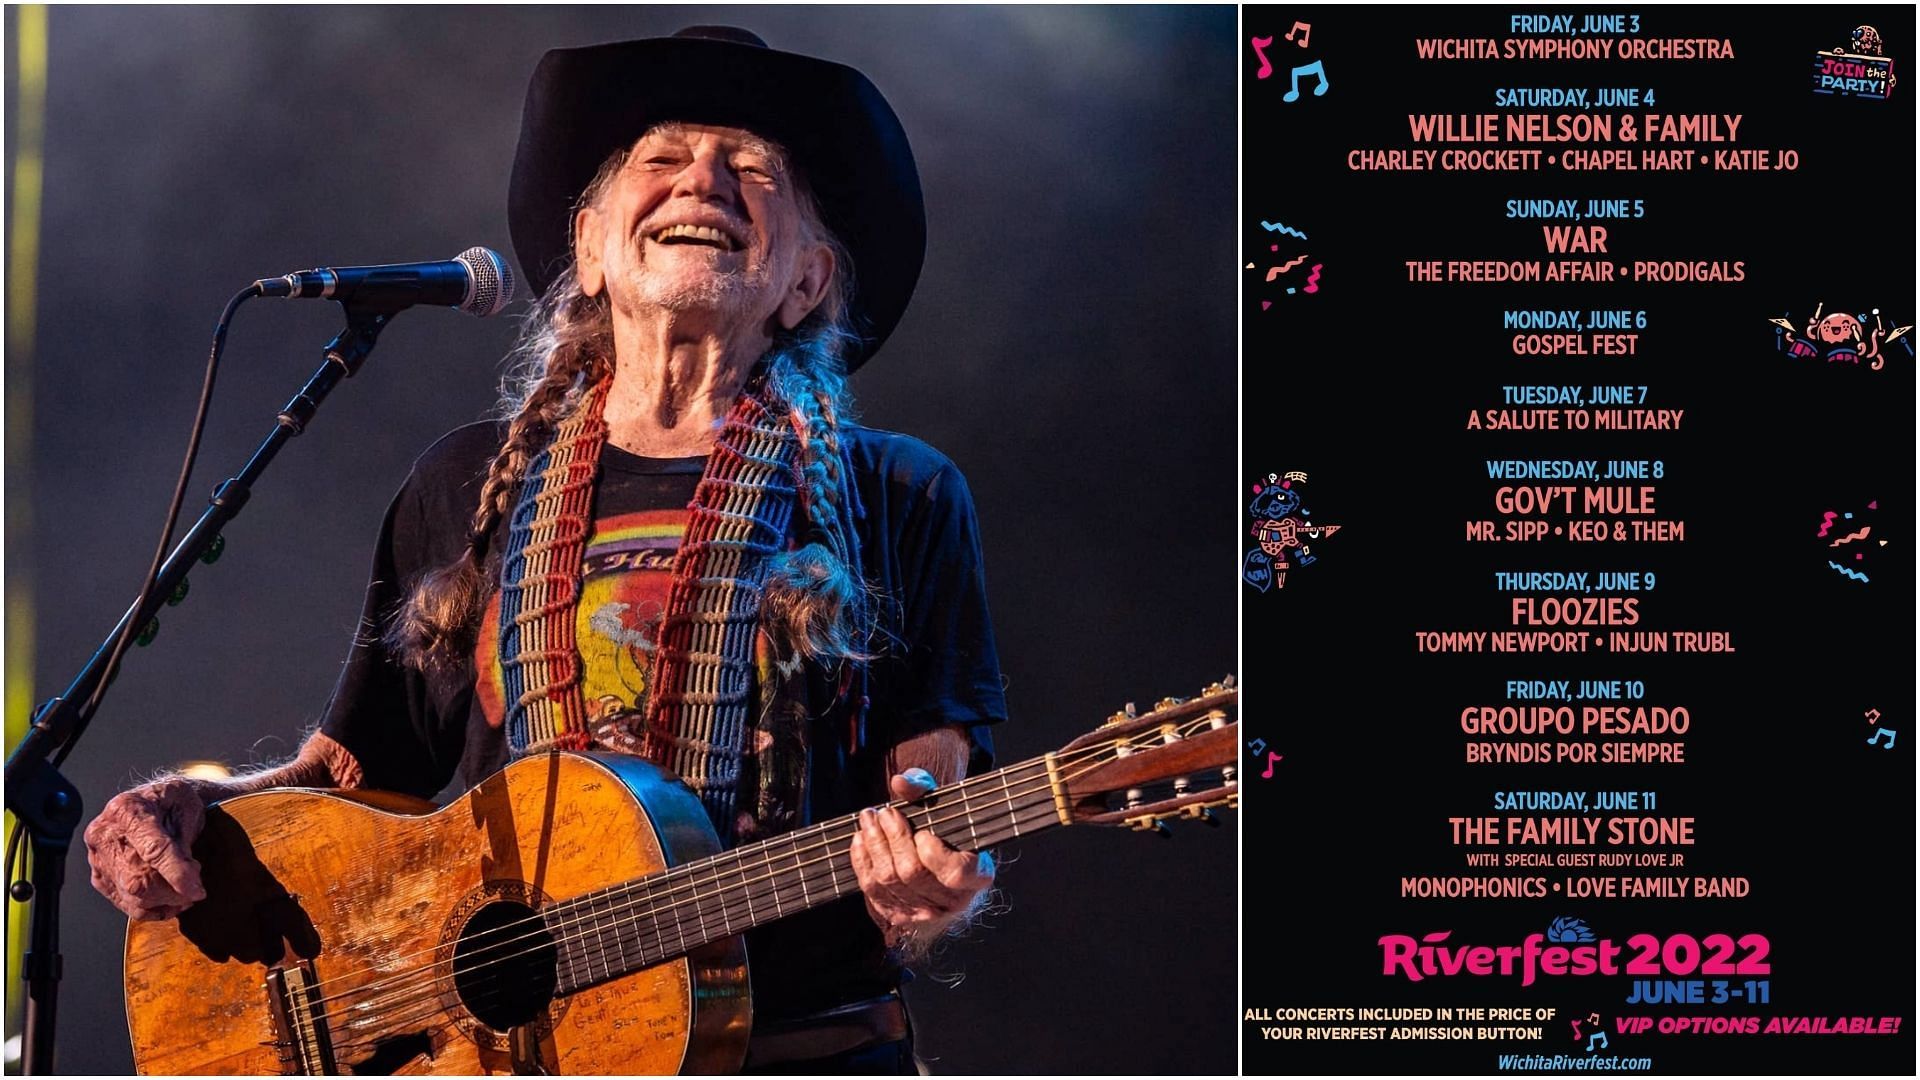 Wichita Riverfest 2022 Tickets, lineup, dates and more as Willie